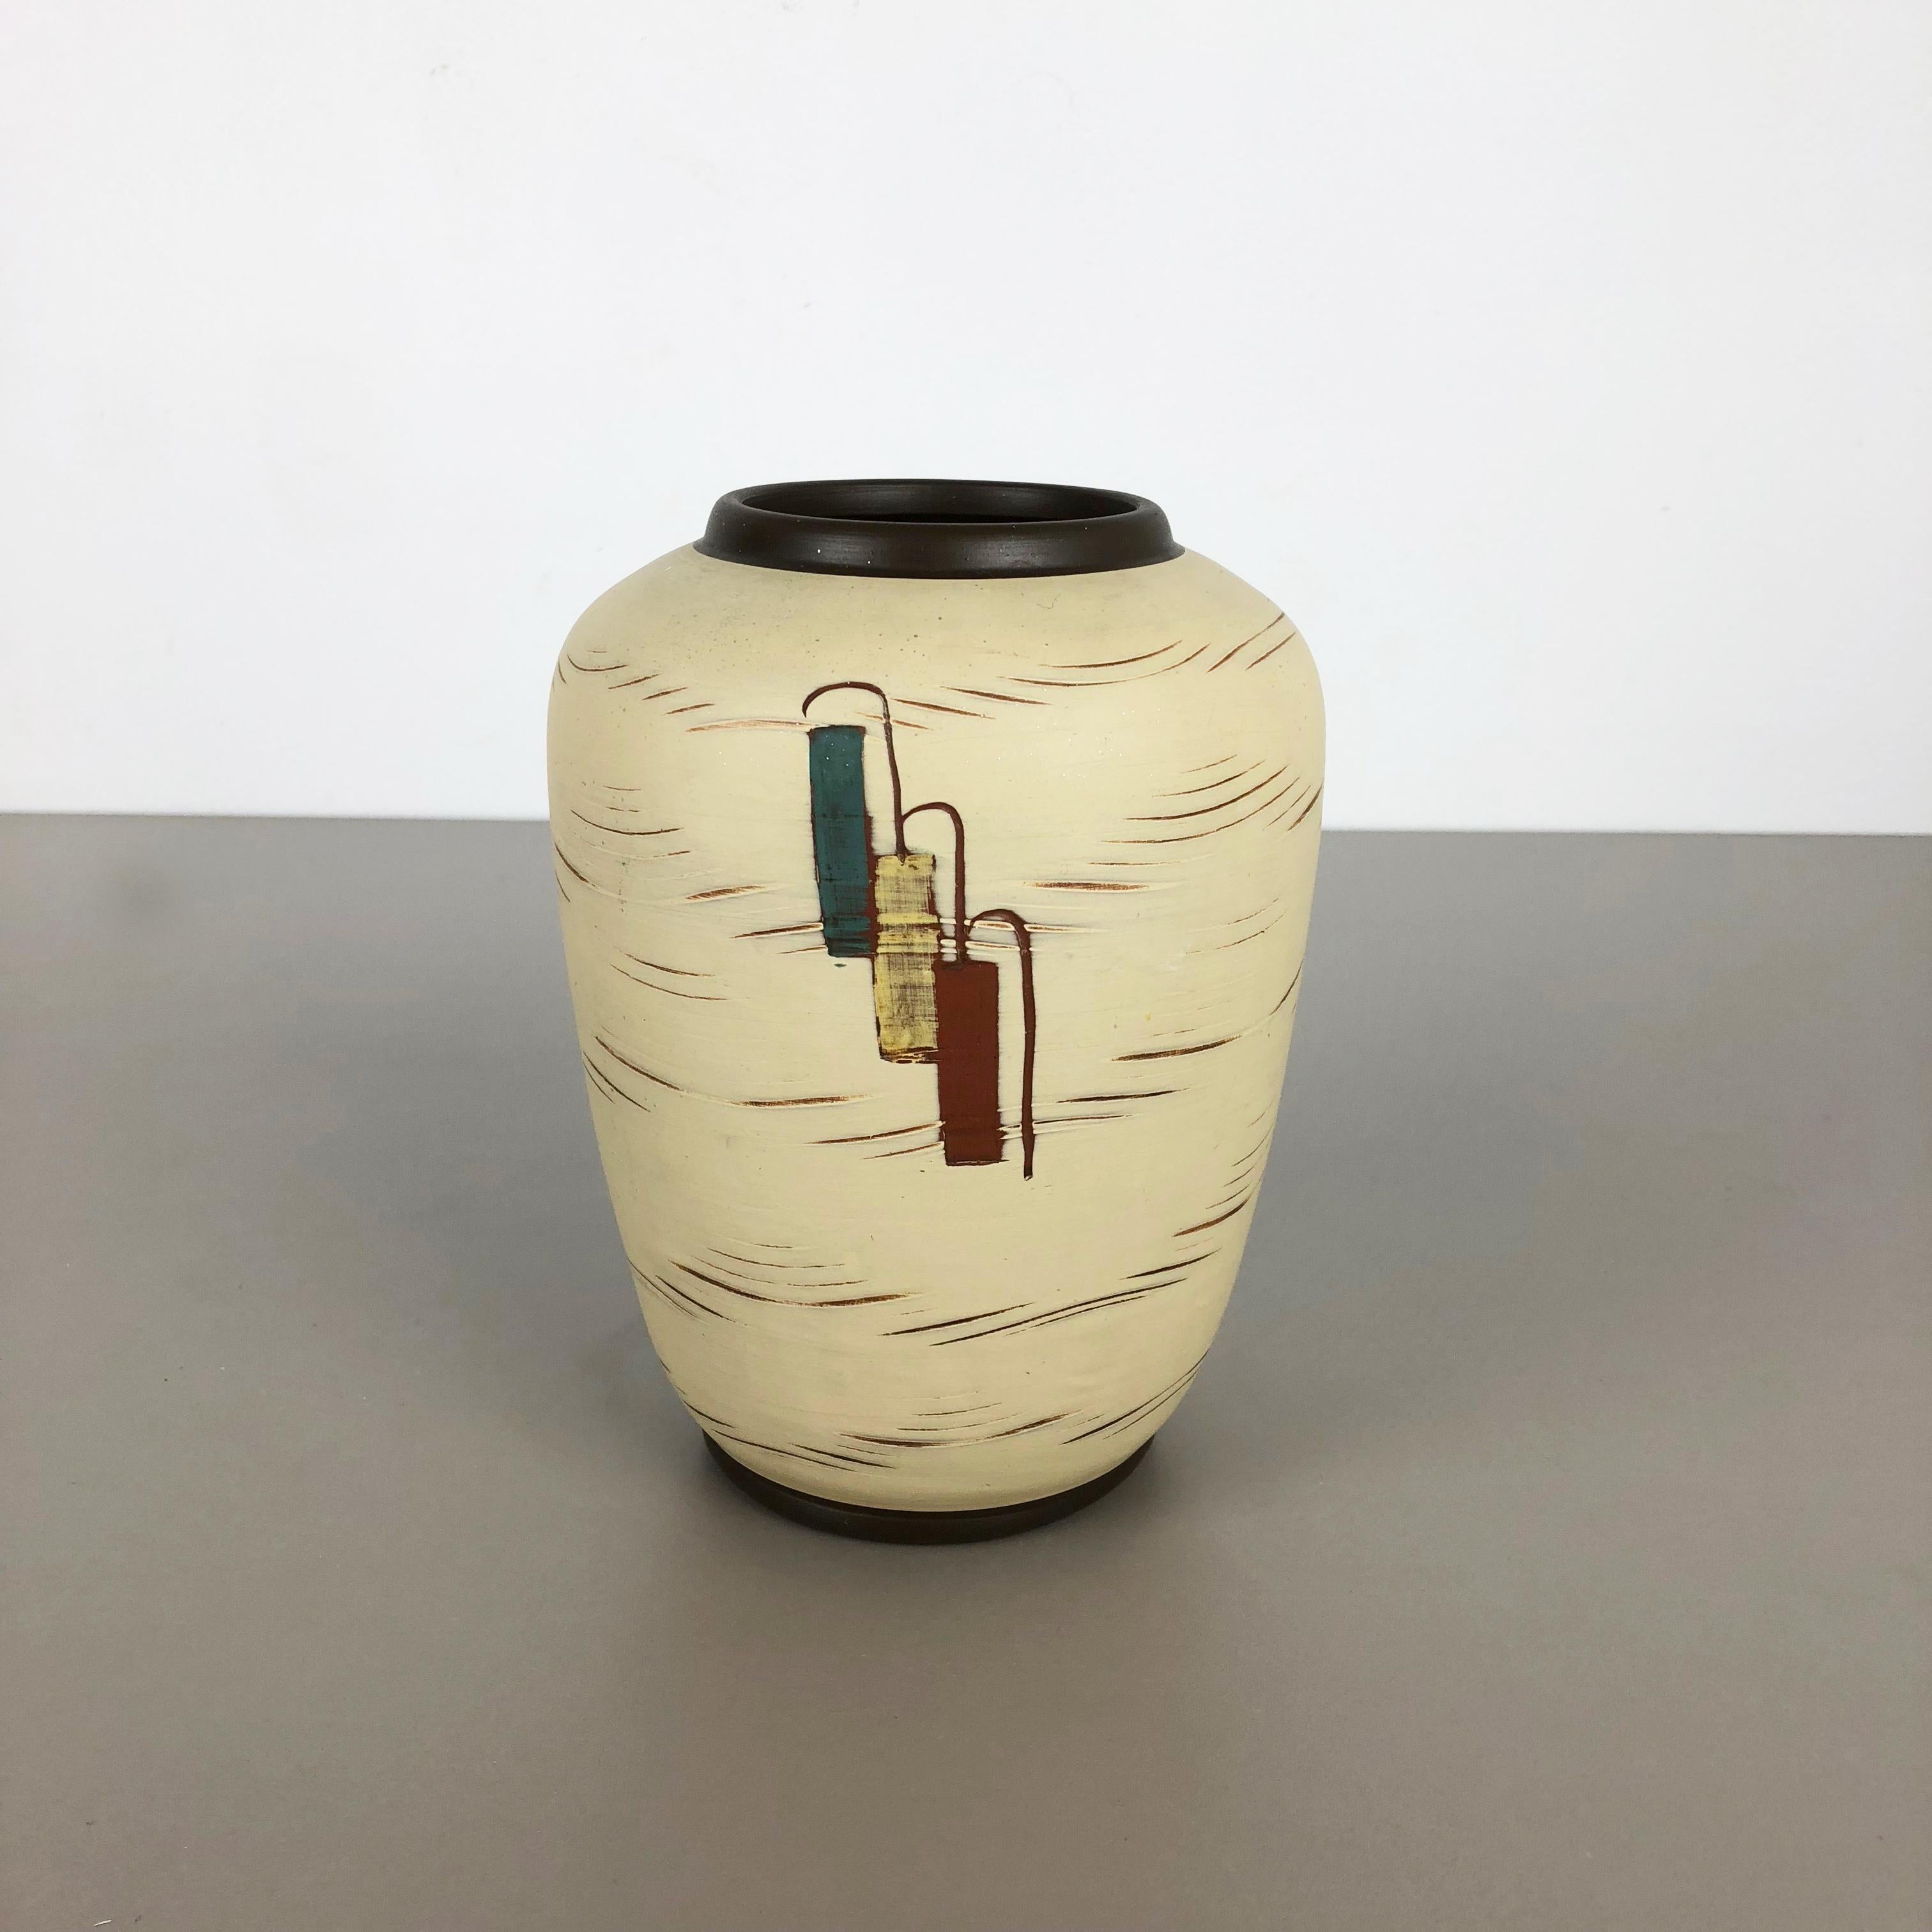 Article: Pottery ceramic vase


Producer: Sawa Ceramic, Germany


Design: Franz Schwaderlapp


Decade: 1960s


Description: Original vintage 1960s pottery ceramic vase in Germany. High quality German production with a nice abstract